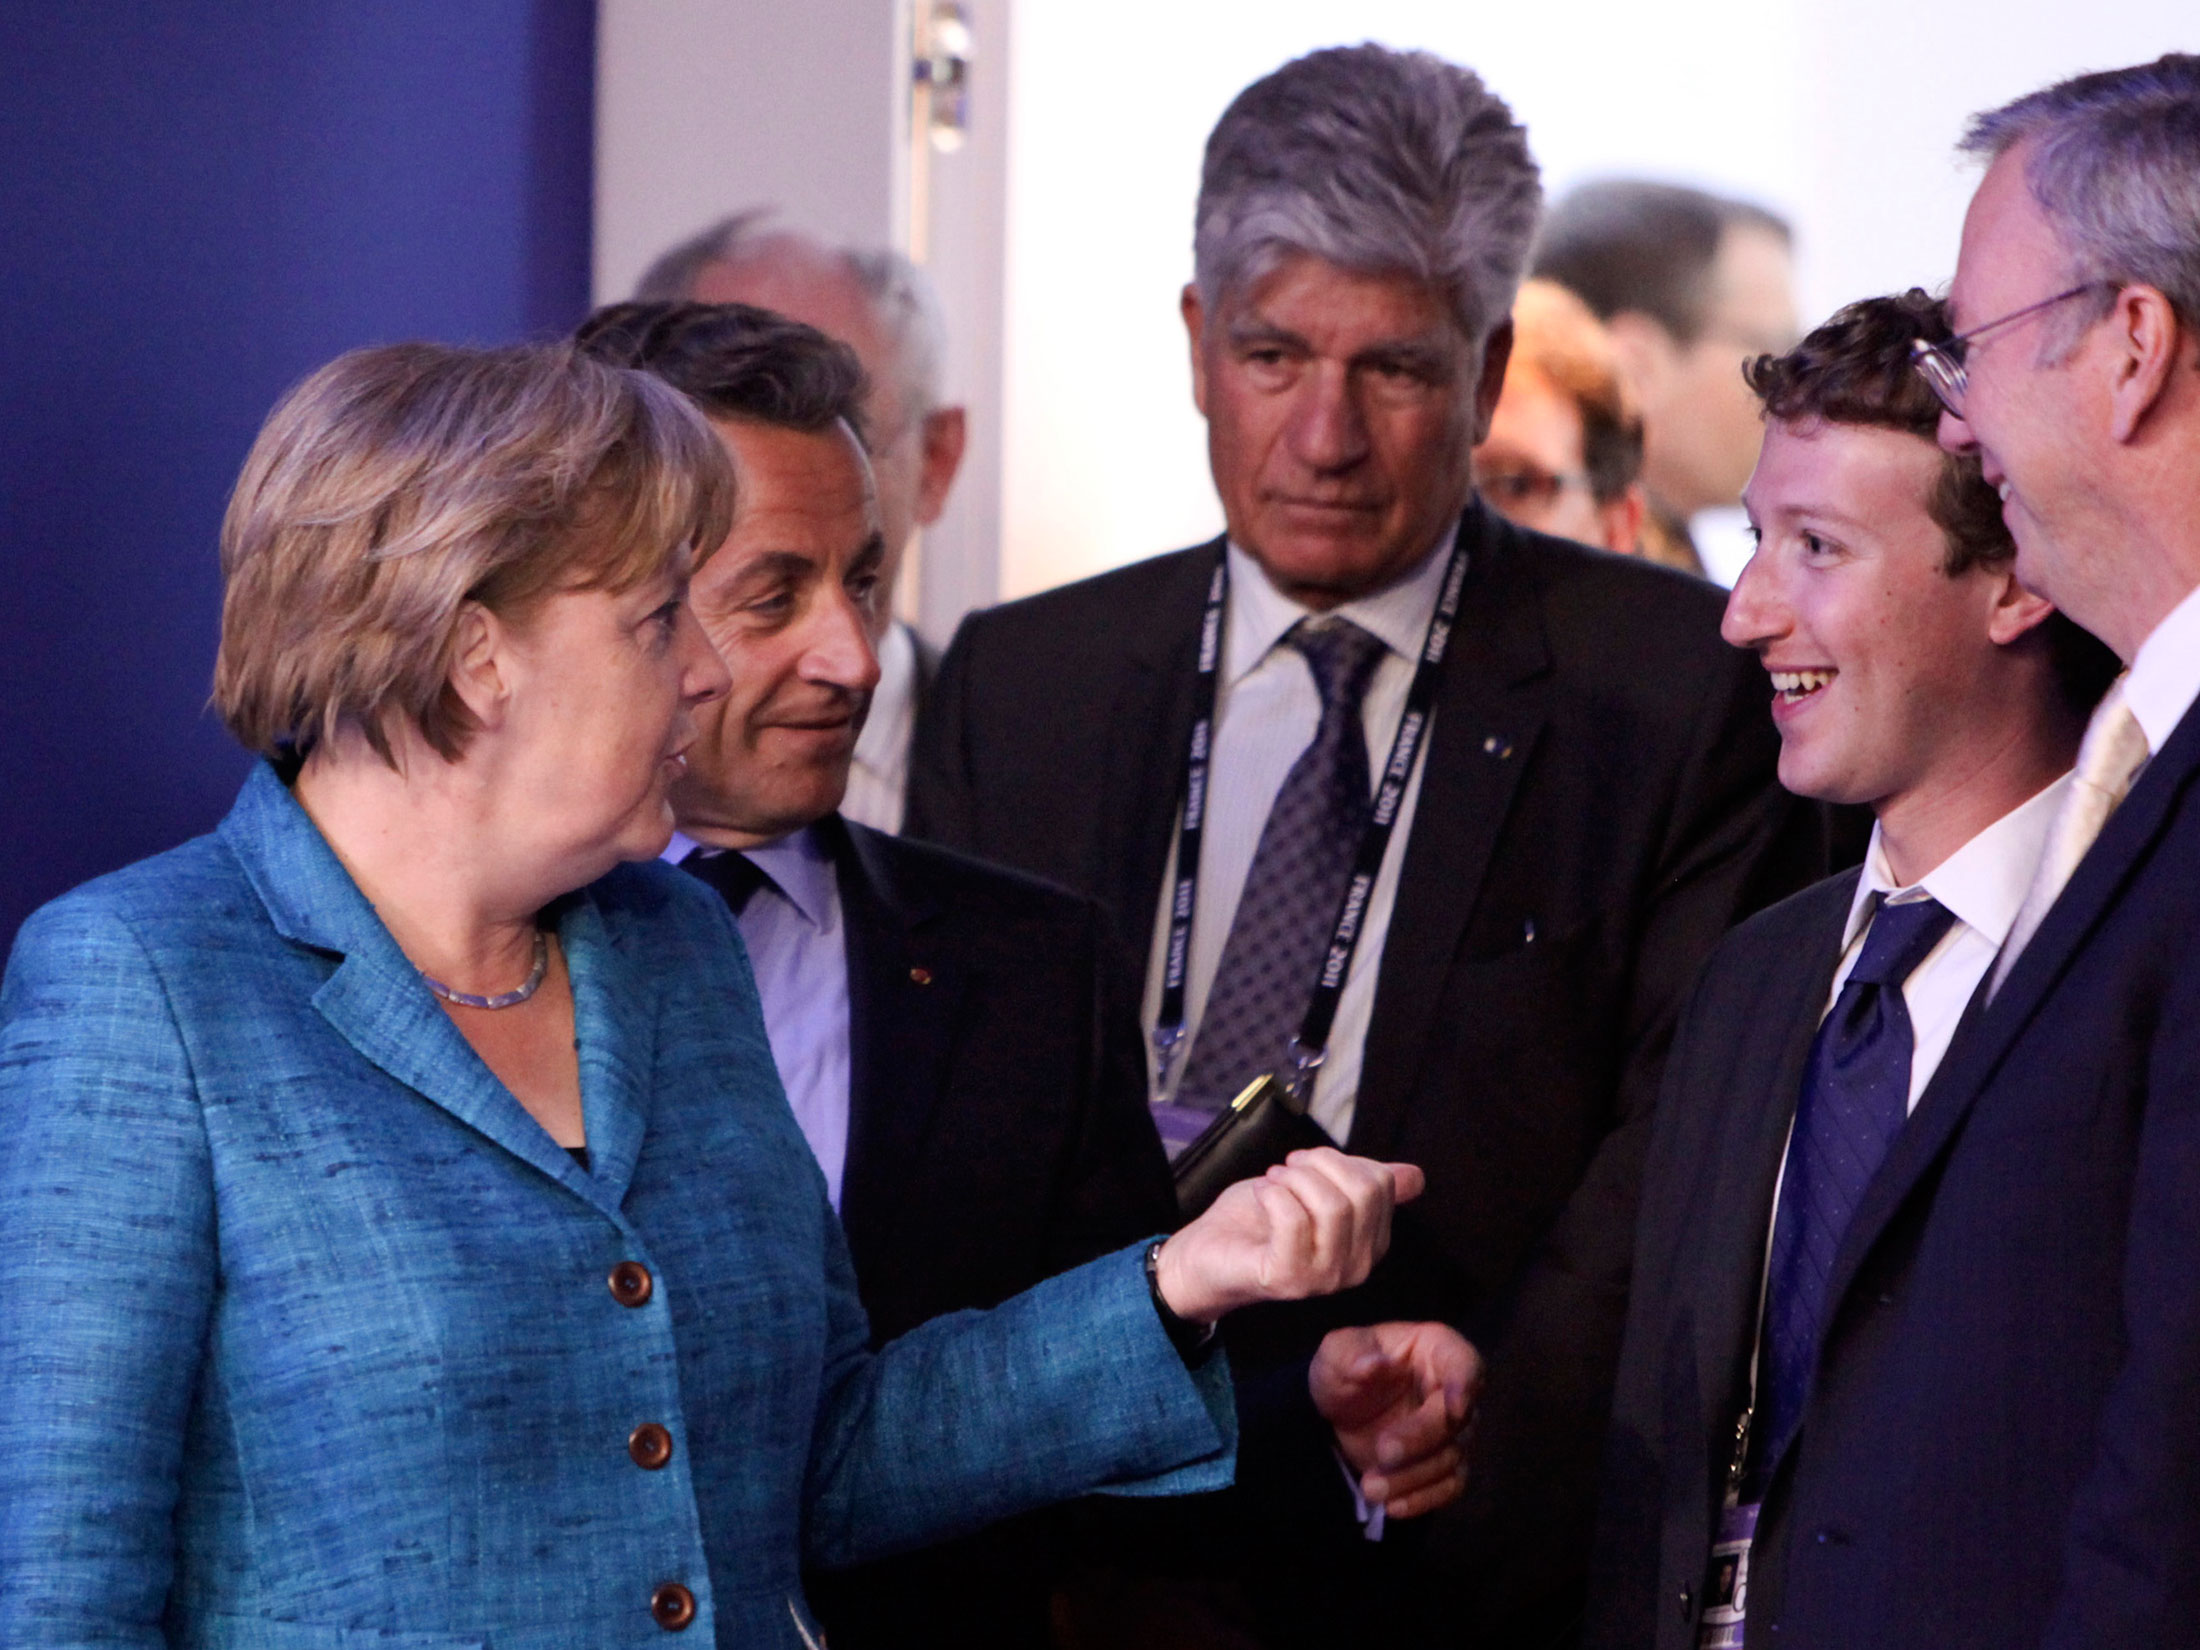 Mark Zuckerberg, founder of Facebook Inc. meets Angela Merkel, Germany's chancellor as they arrive for the internet session of the Group of Eight summit in Deauville, France, on Thursday, May 26, 2011.
